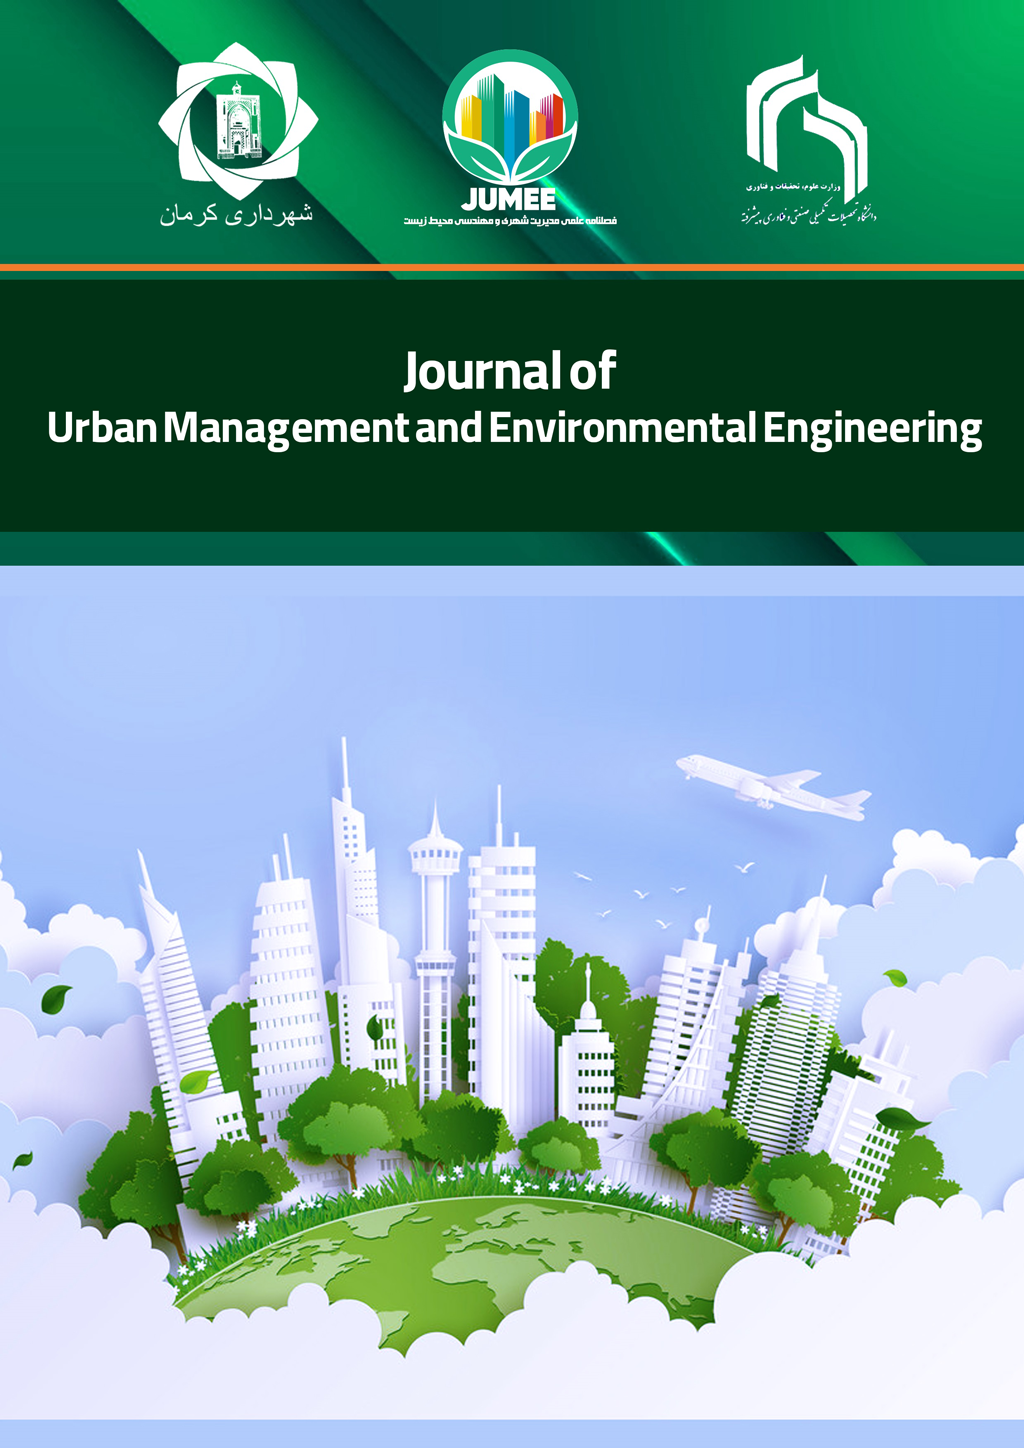 Journal of Urban Management and Environmental Engineering